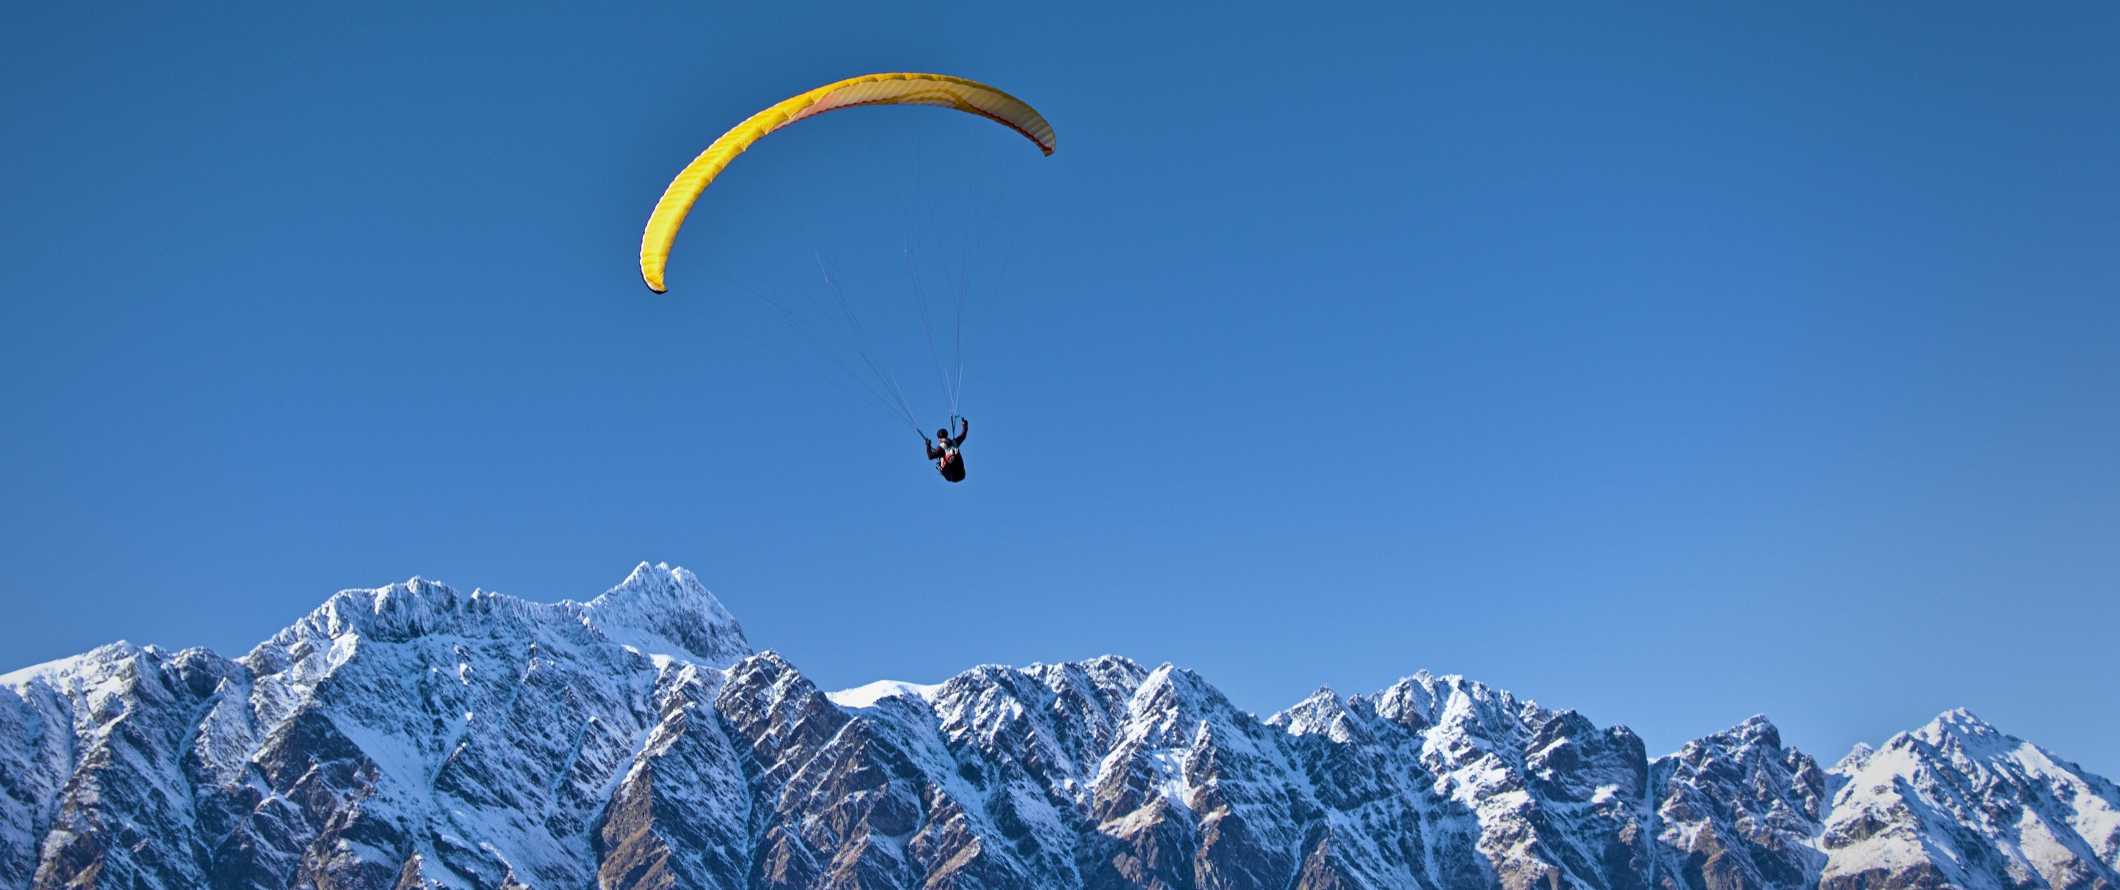 Someone parachuting over snowy mountaintops in New Zealand.